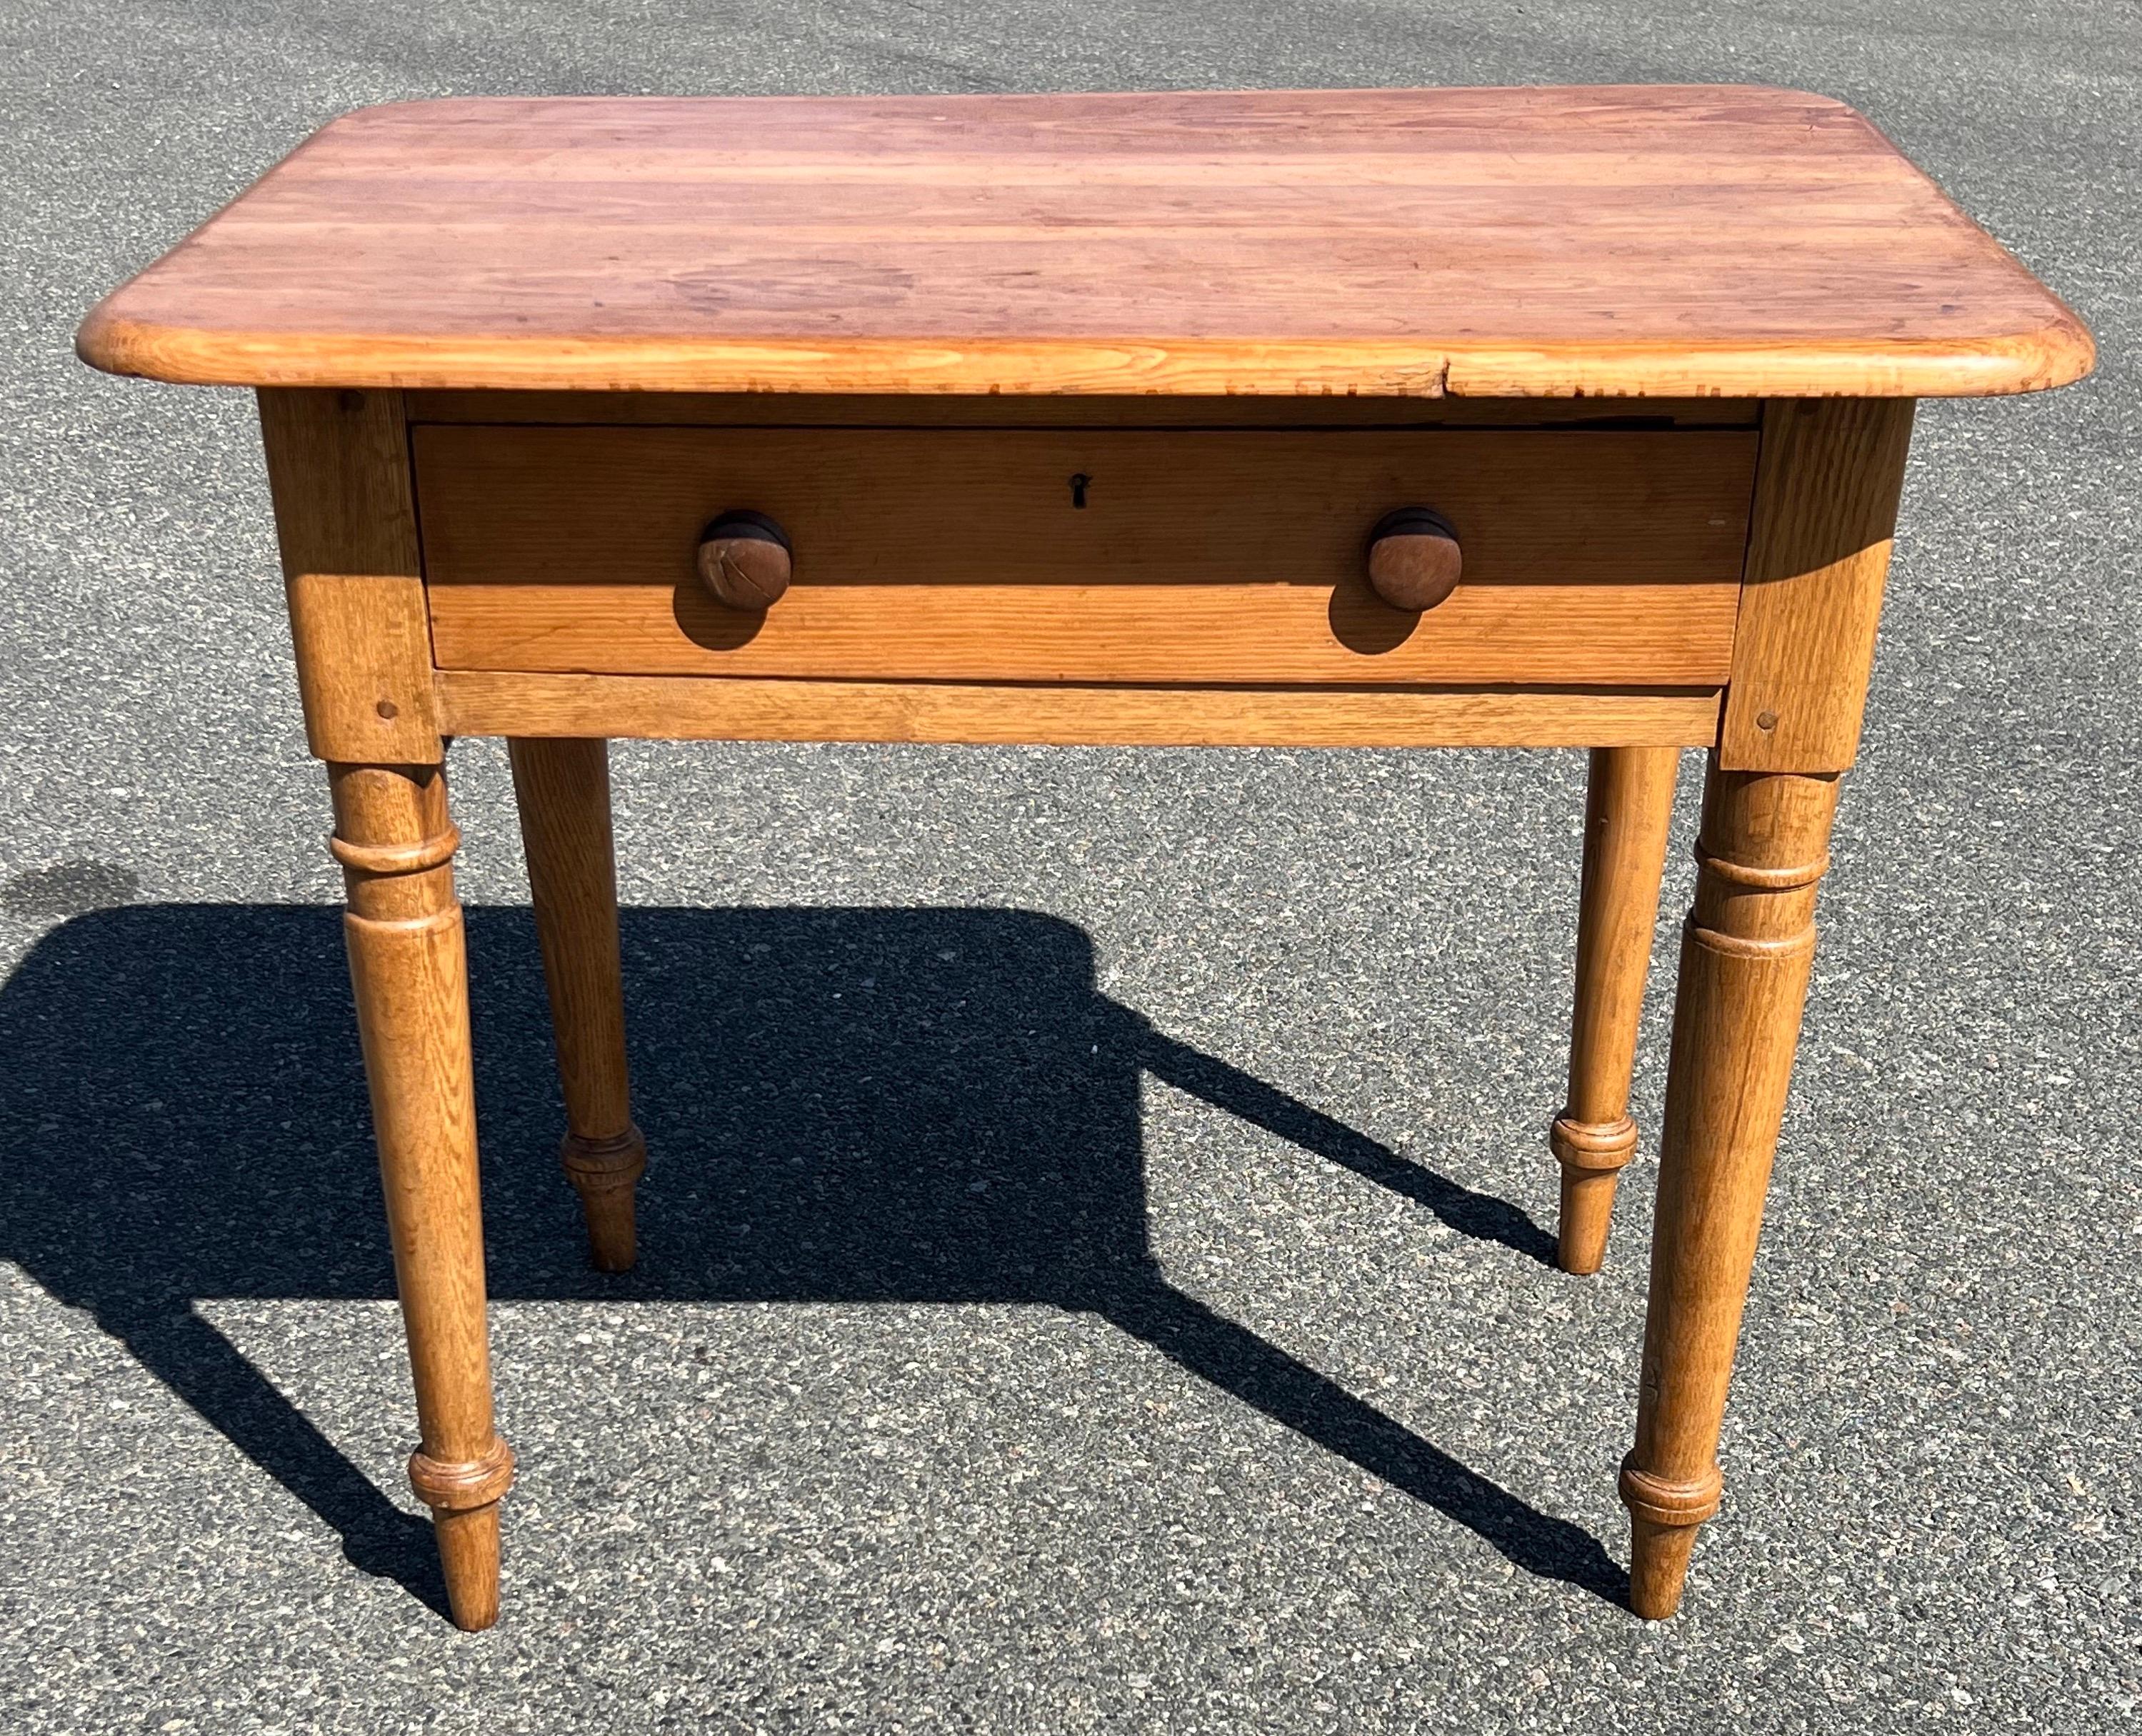 19th century Pine side table in natural finish. Thick top with rounded corners and good overhang. Large single drawer with two turned wooden knobs and carved key hole (no key). Overall pegged construction.